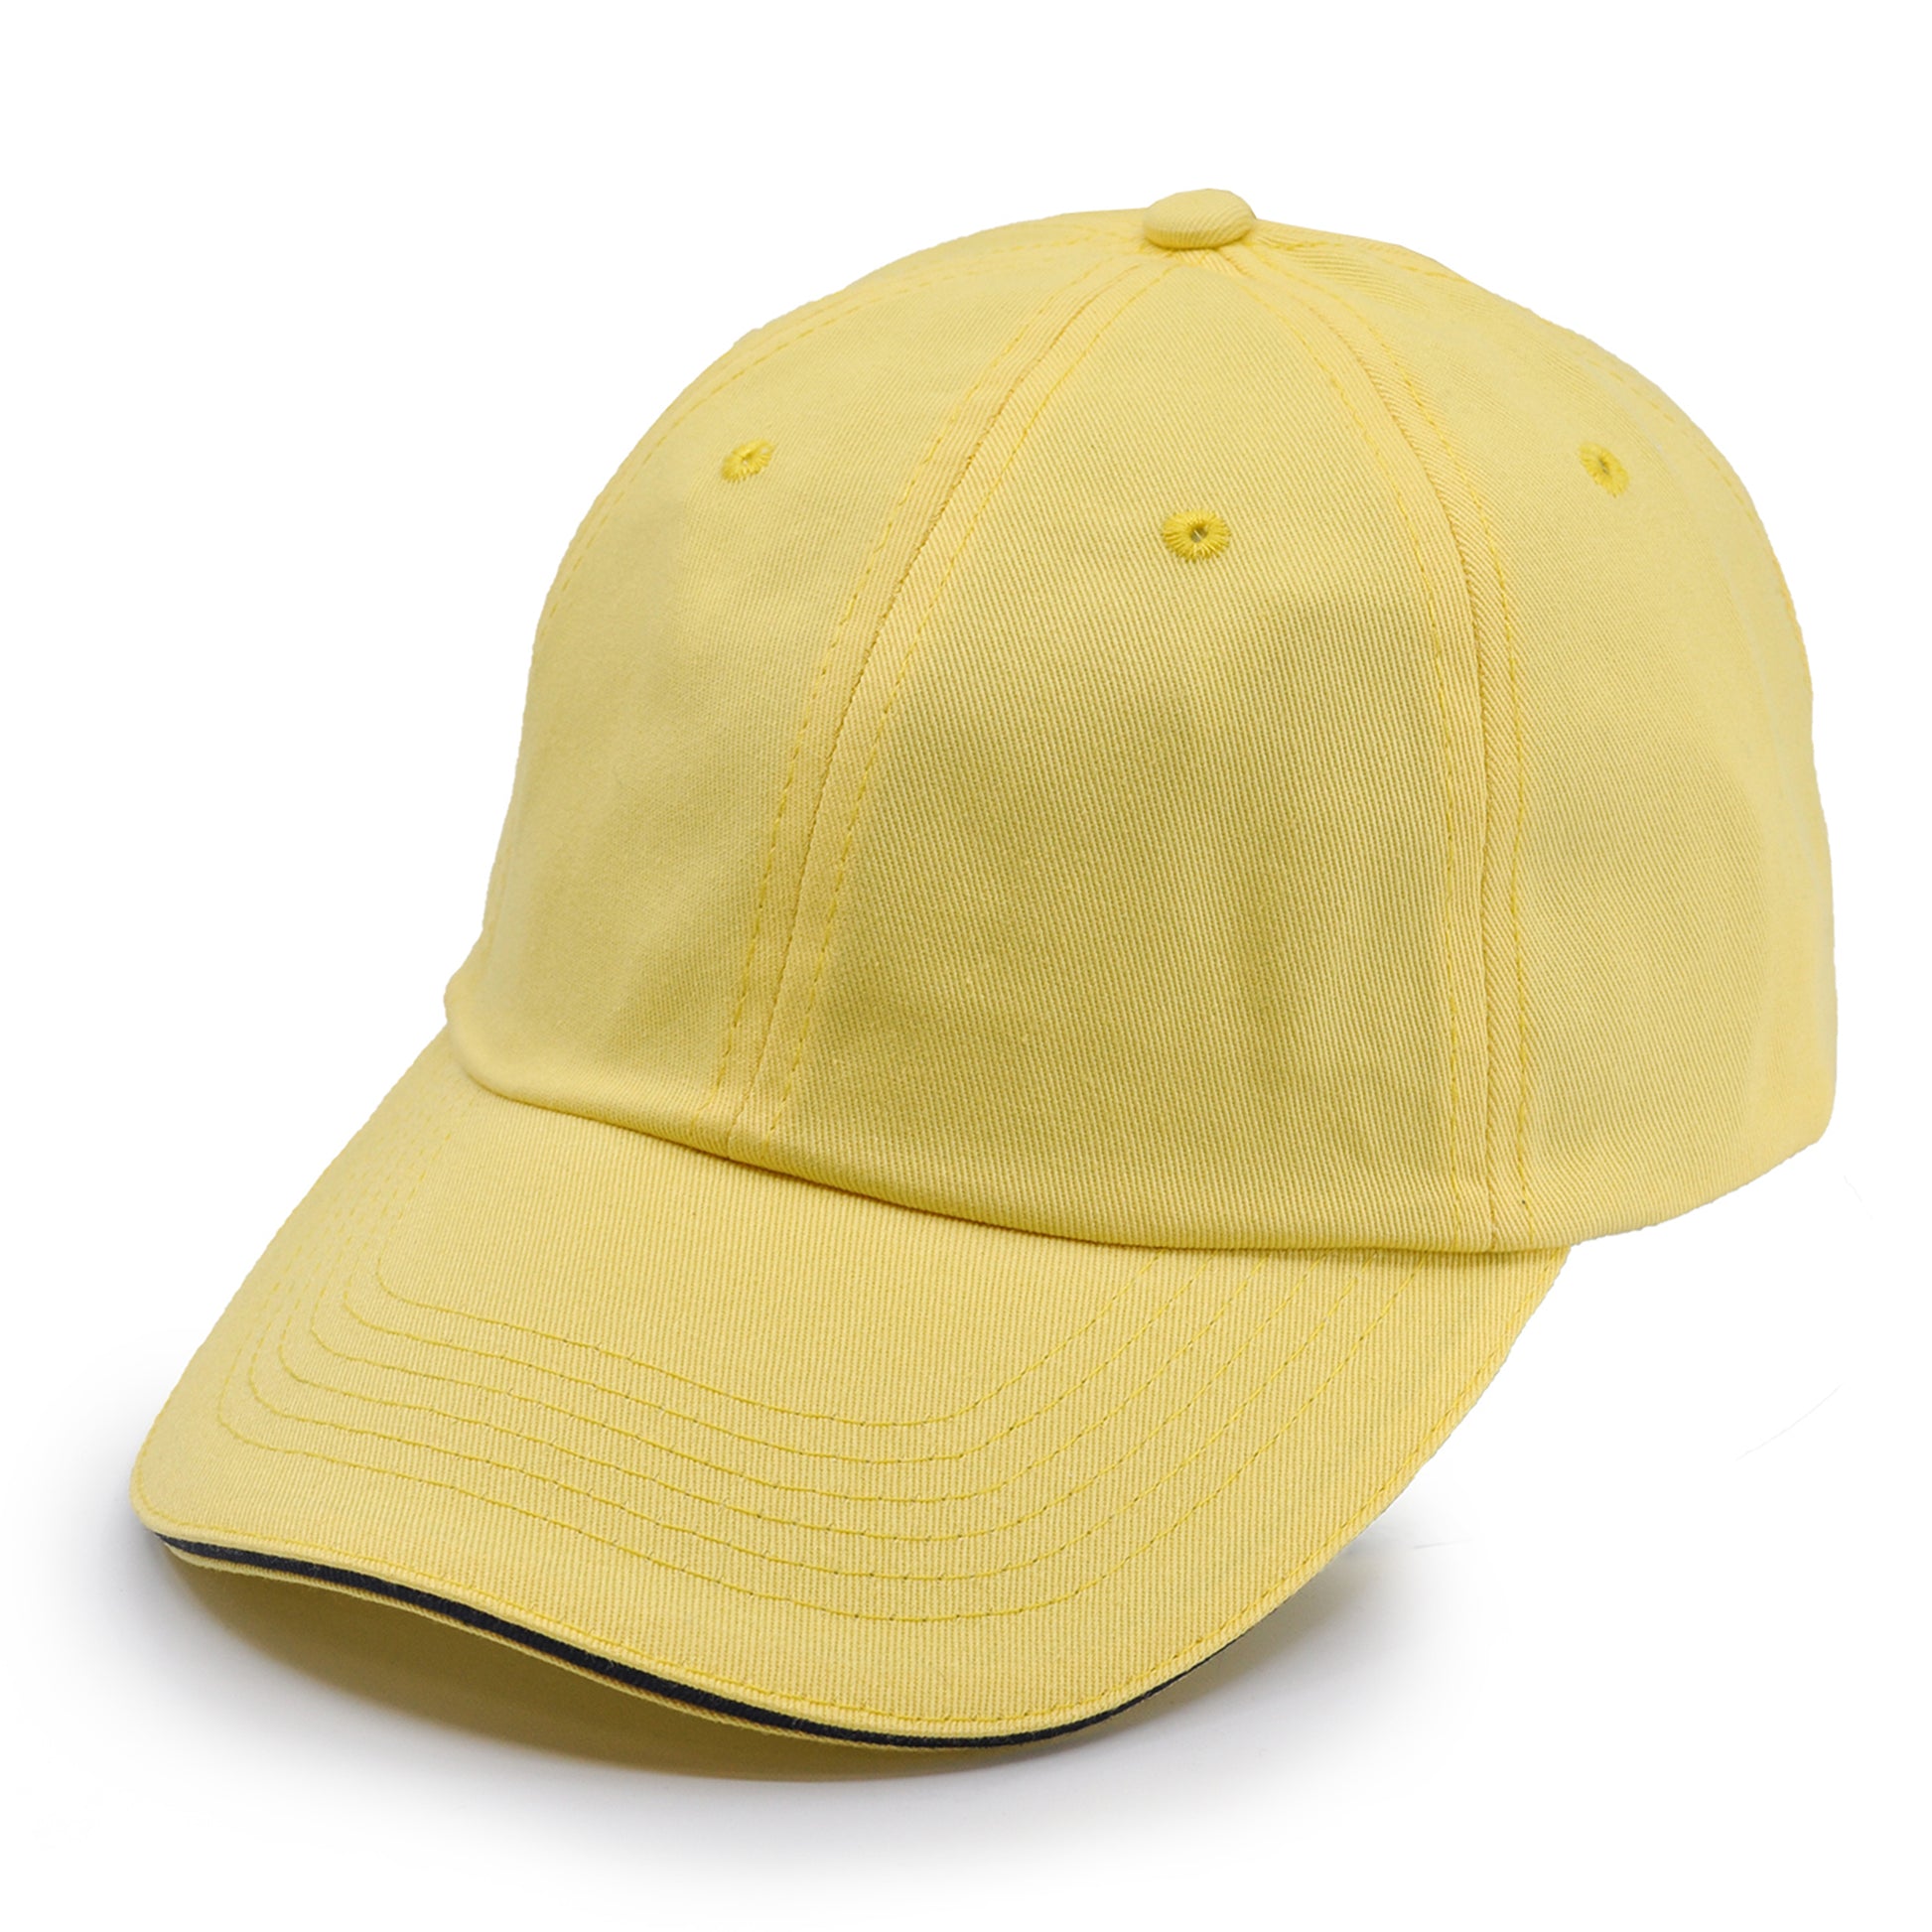 River Beach 100% Cotton Unisex Sports Cap, in color Sunlight Yellow. Front View.